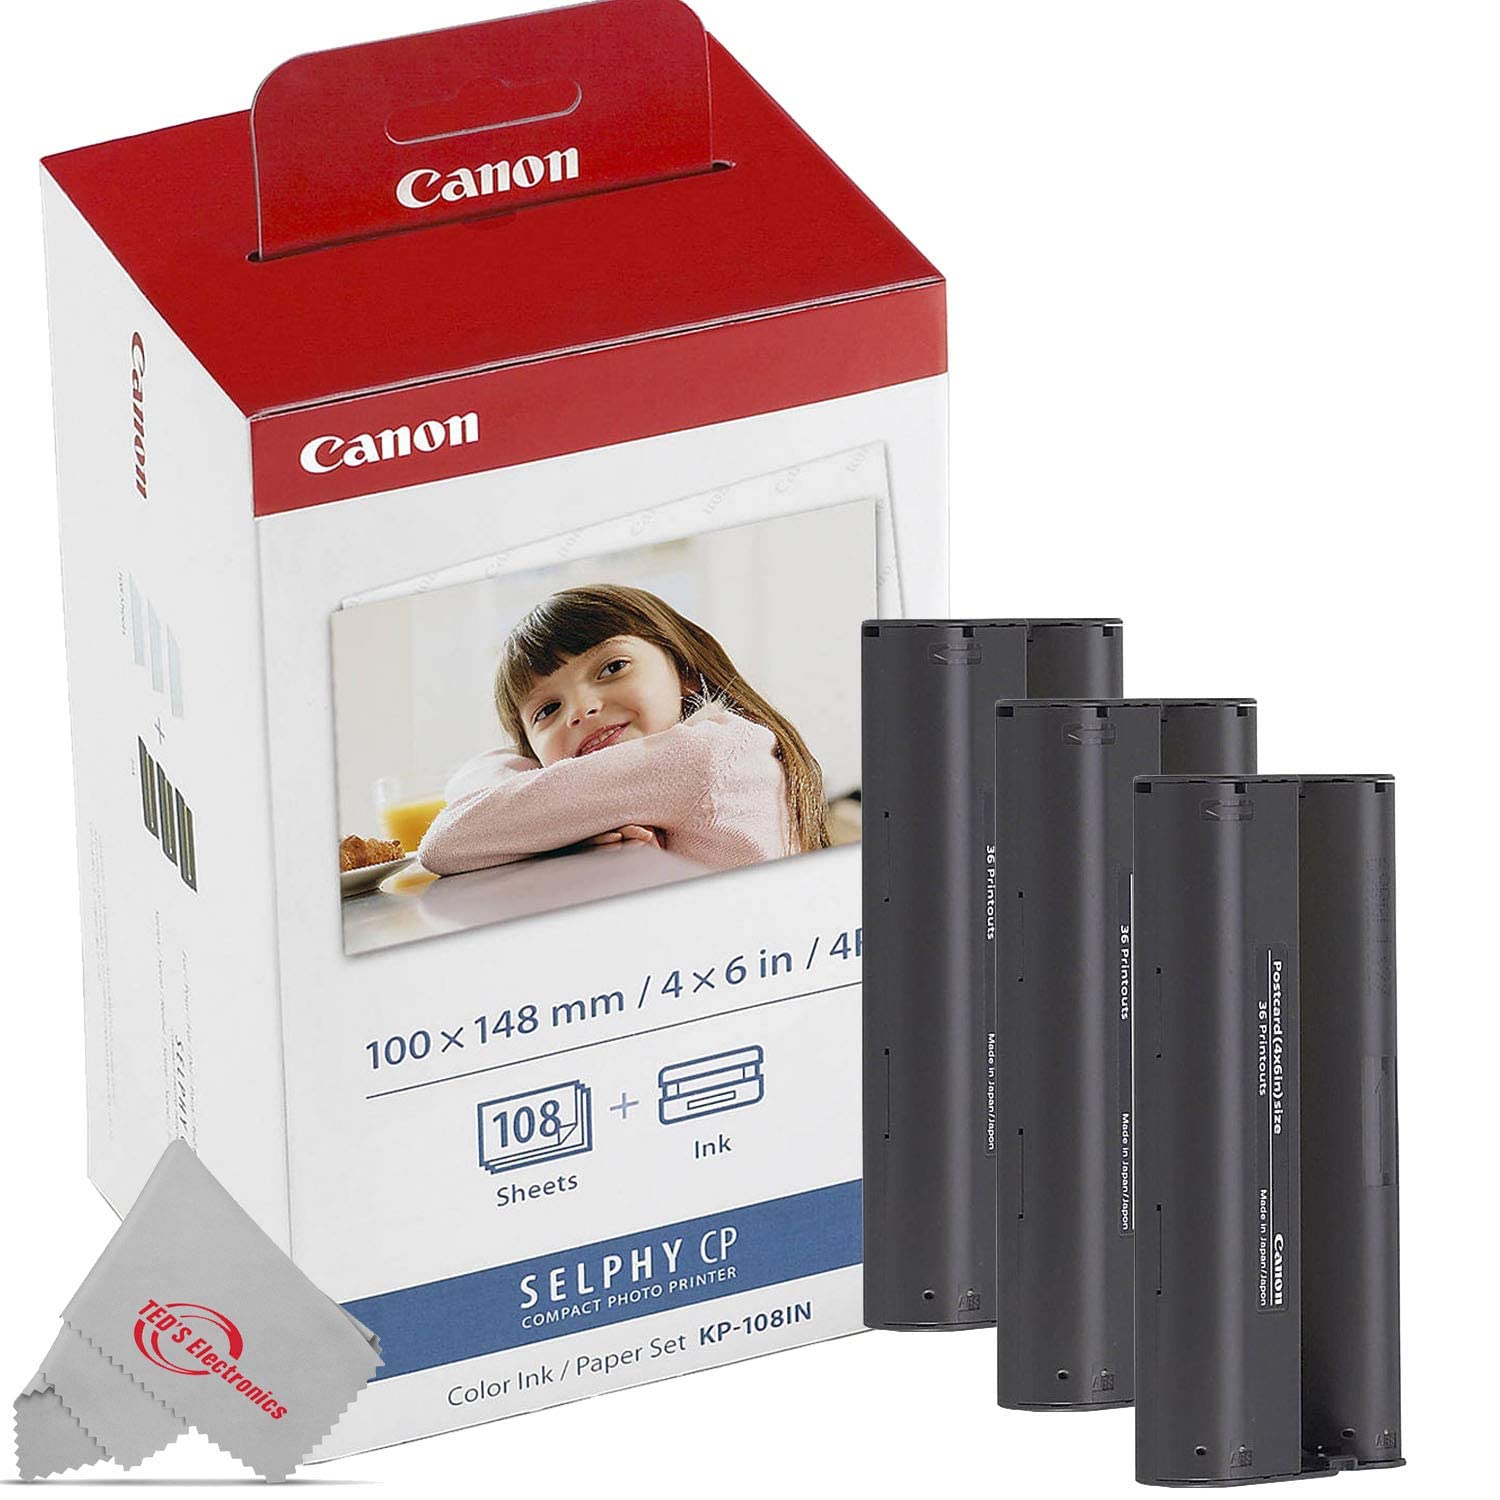 Canon KP-108IN Color Ink/Paper Set